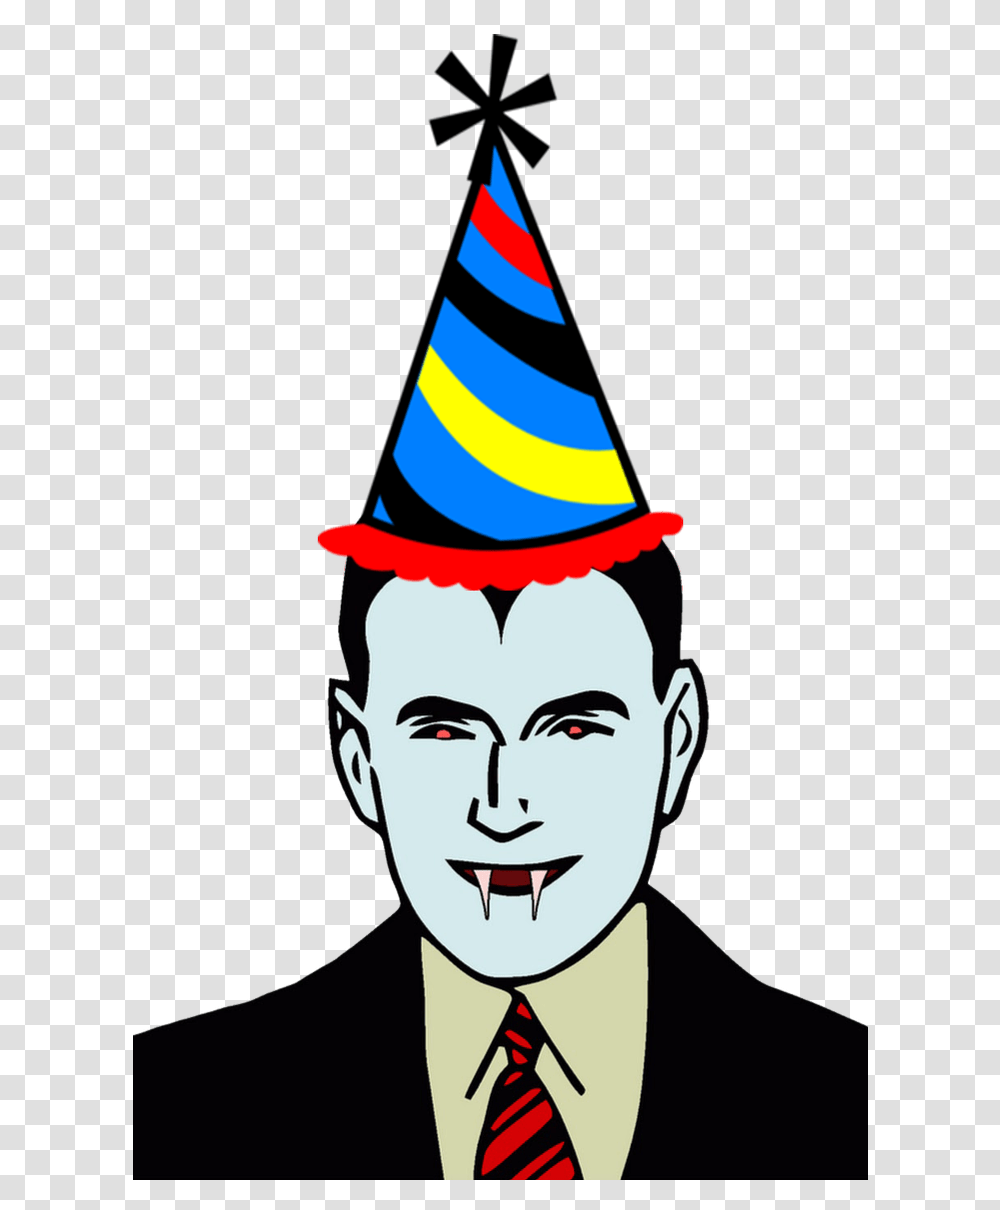 Handing Out Party Hats Made Out Of Paper With The Word Man Picture Clipart Black And White, Apparel, Tie, Accessories Transparent Png